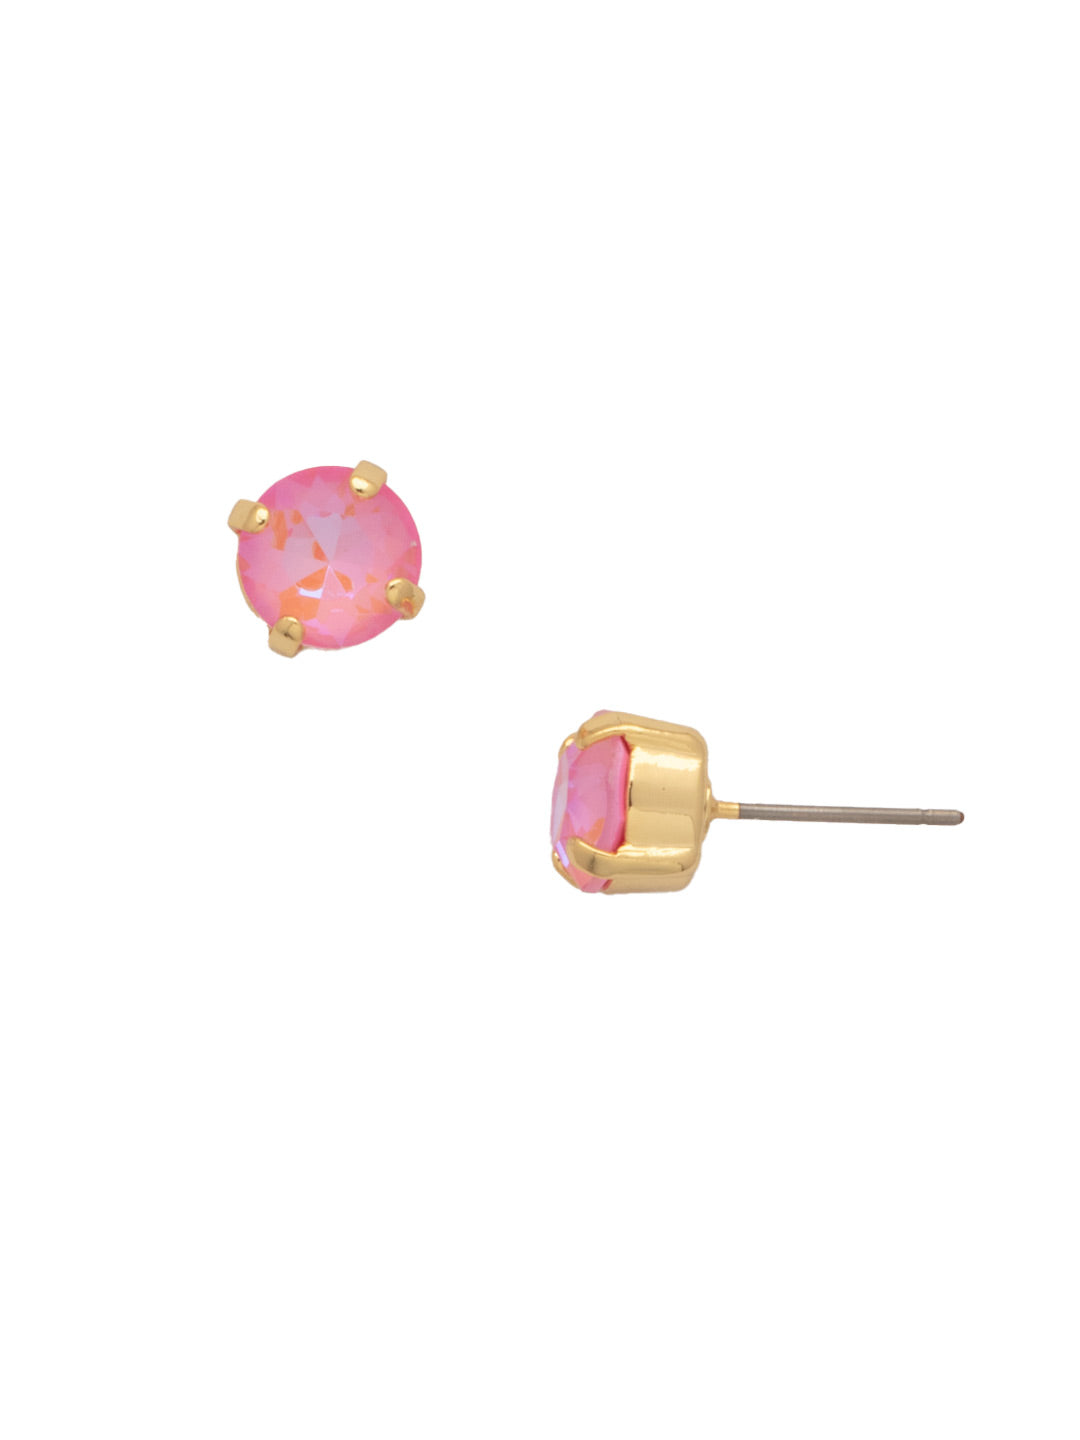 Simple Stud Earrings - EFC99BGBFL - <p>The Simple Stud Earrings feature a single solid crystal on a surgical steel post, creating a small but sparkly everyday staple! Need help picking a stud? <a href="https://www.sorrelli.com/blogs/sisterhood/round-stud-earrings-101-a-rundown-of-sizes-styles-and-sparkle">Check out our size guide!</a> From Sorrelli's Big Flirt collection in our Bright Gold-tone finish.</p>